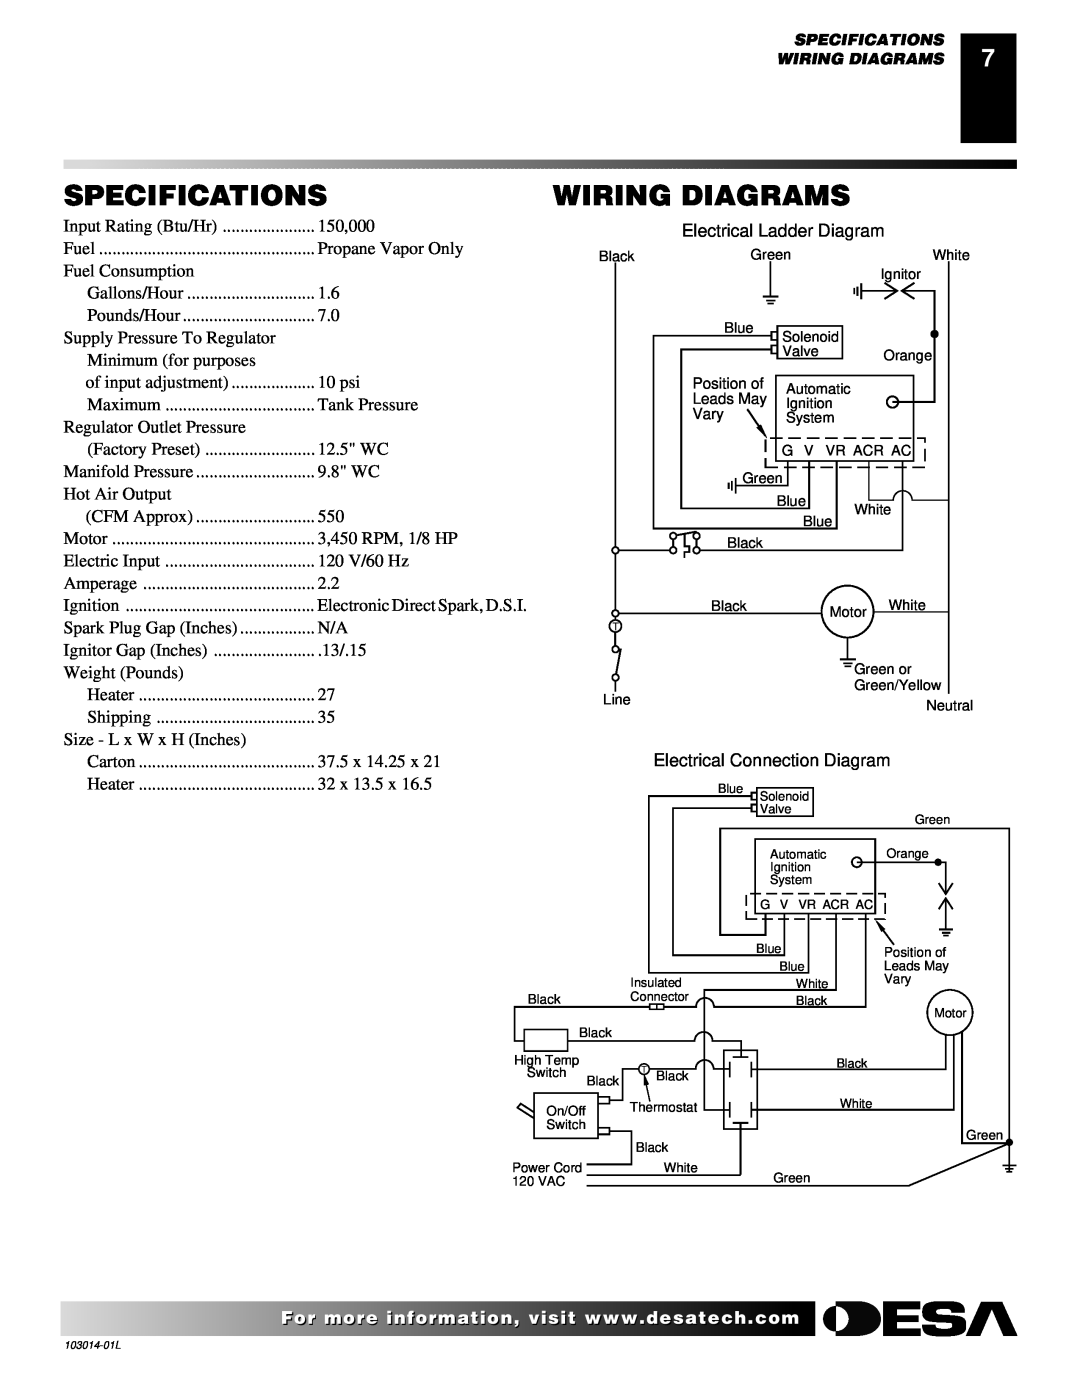 Desa SBLP155AT owner manual Specifications, Wiring Diagrams 